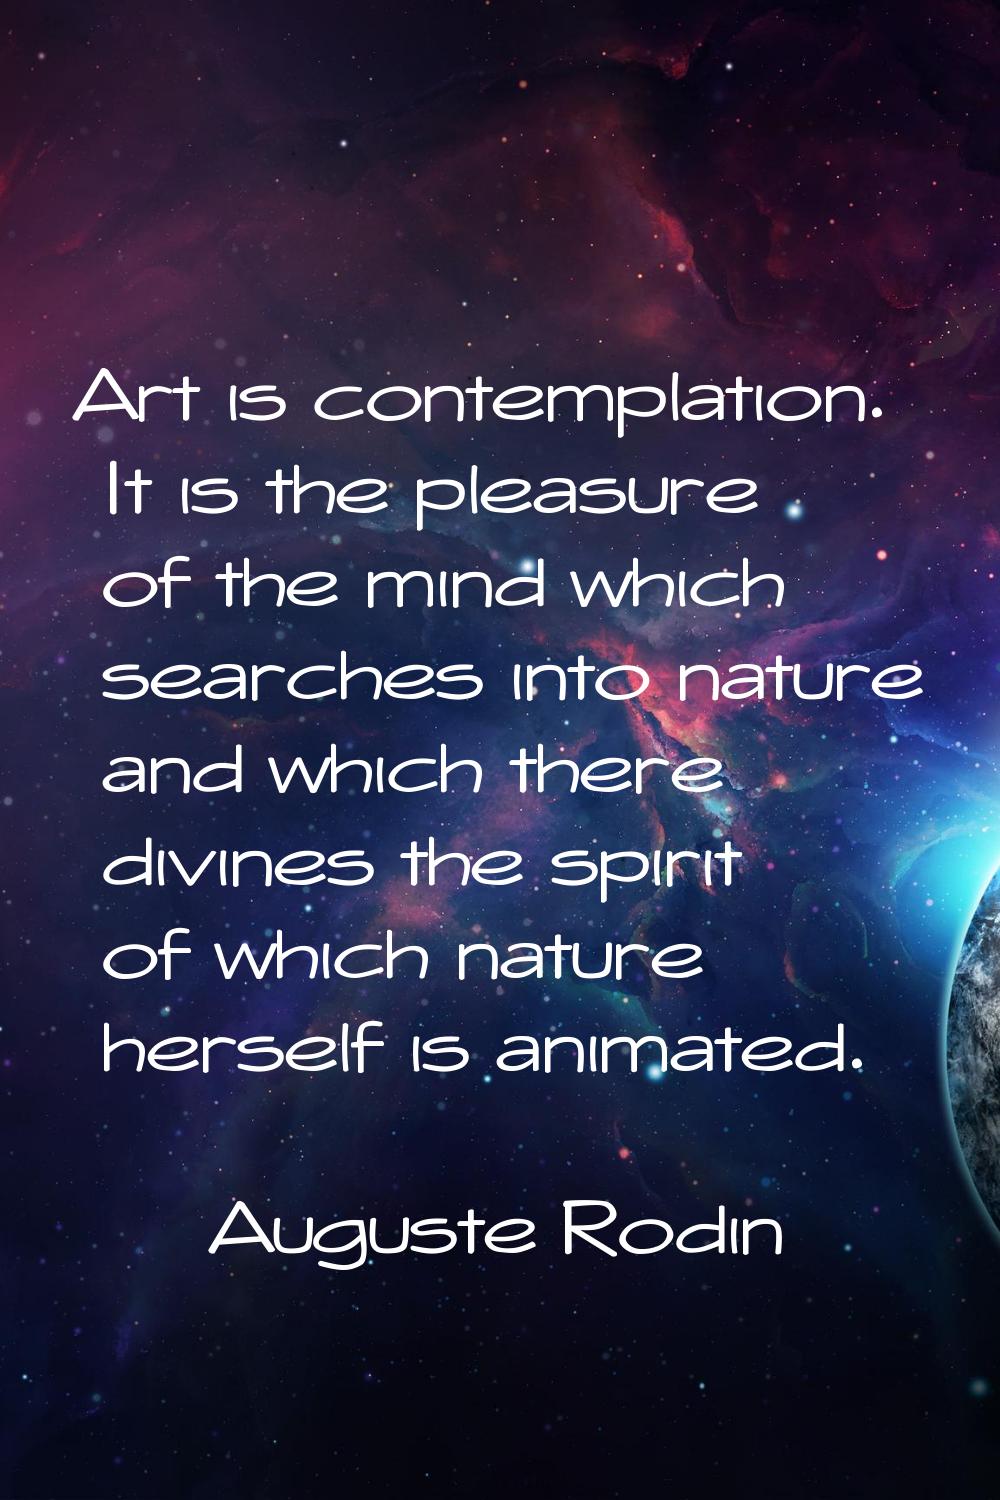 Art is contemplation. It is the pleasure of the mind which searches into nature and which there div